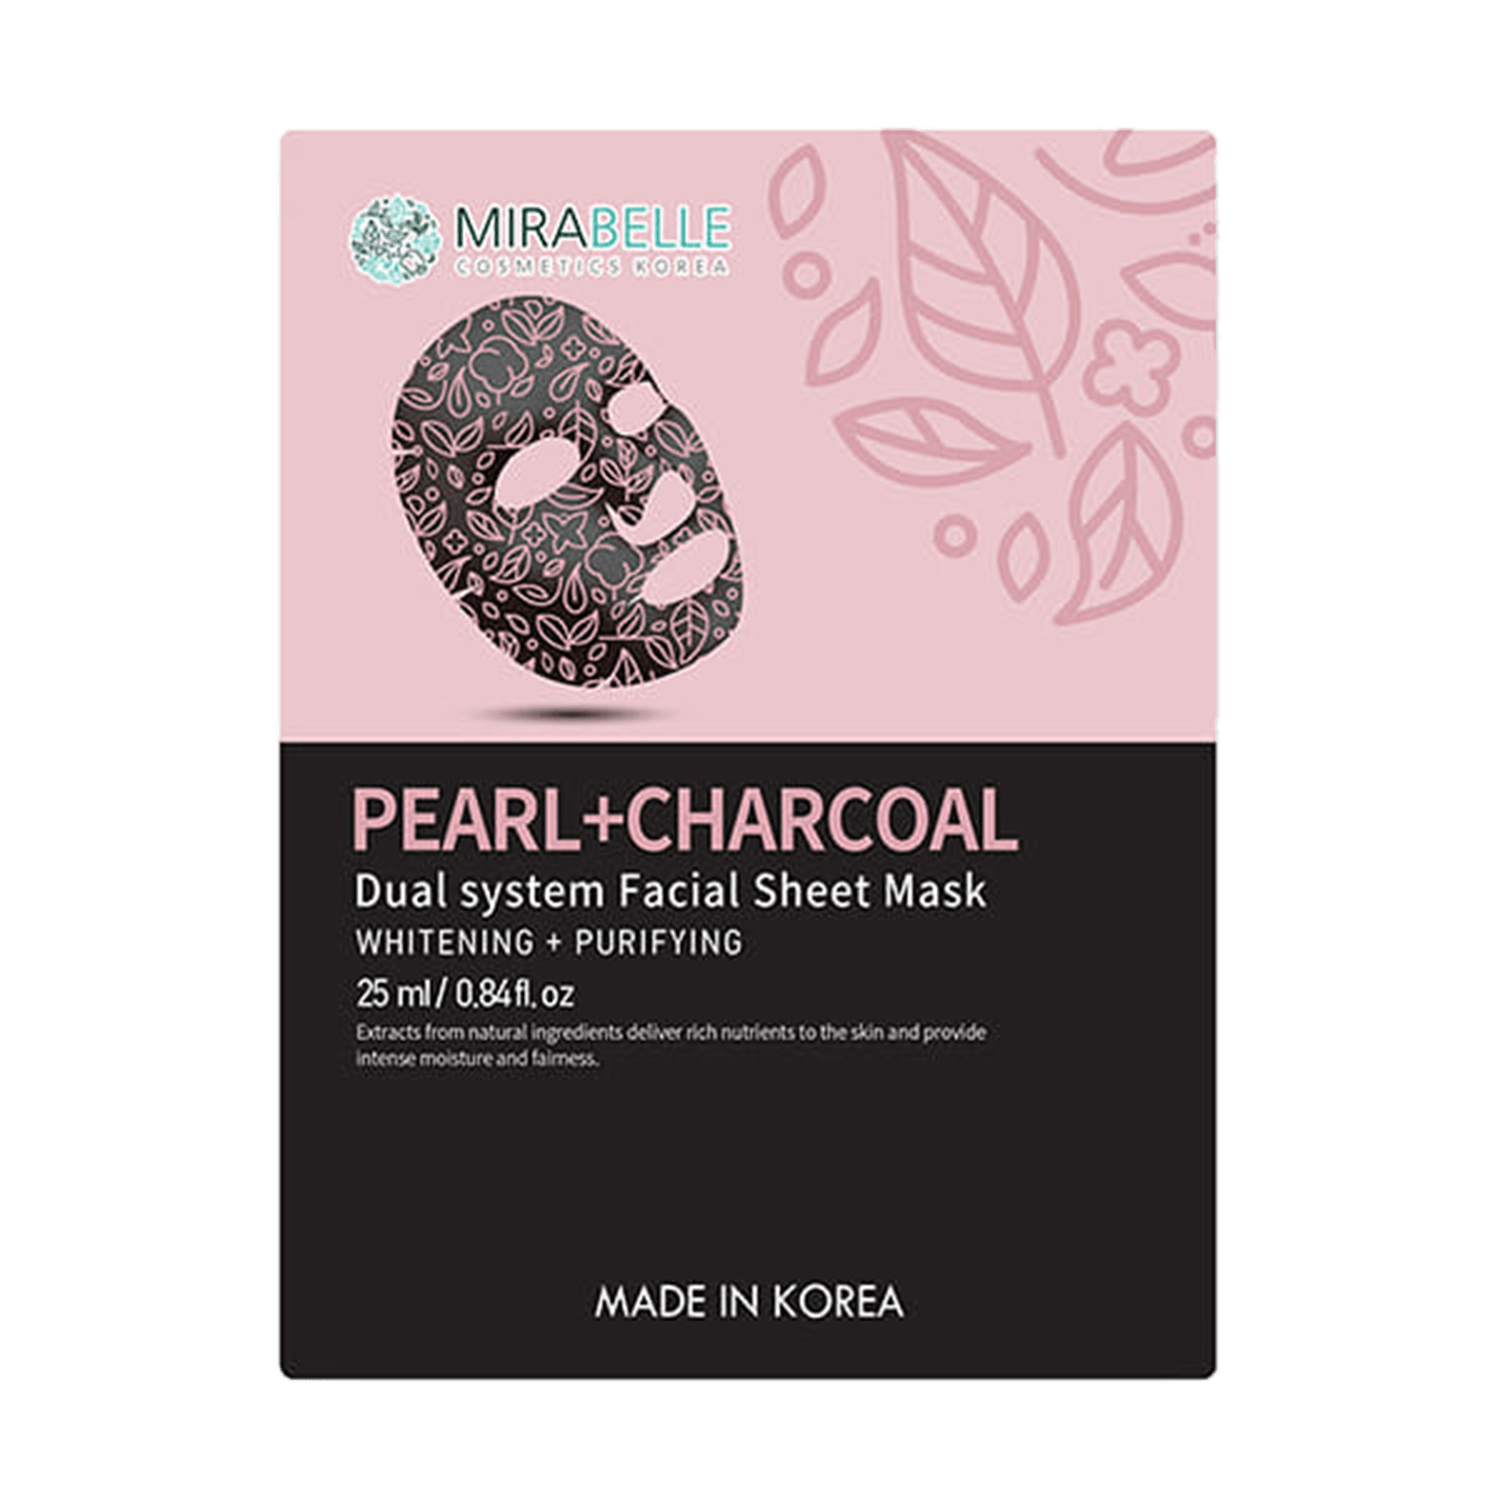 Mirabelle Cosmetics Korea | Mirabelle Cosmetics Korea Pearl And Charcoal Dual System Facial Sheet Mask (25ml)